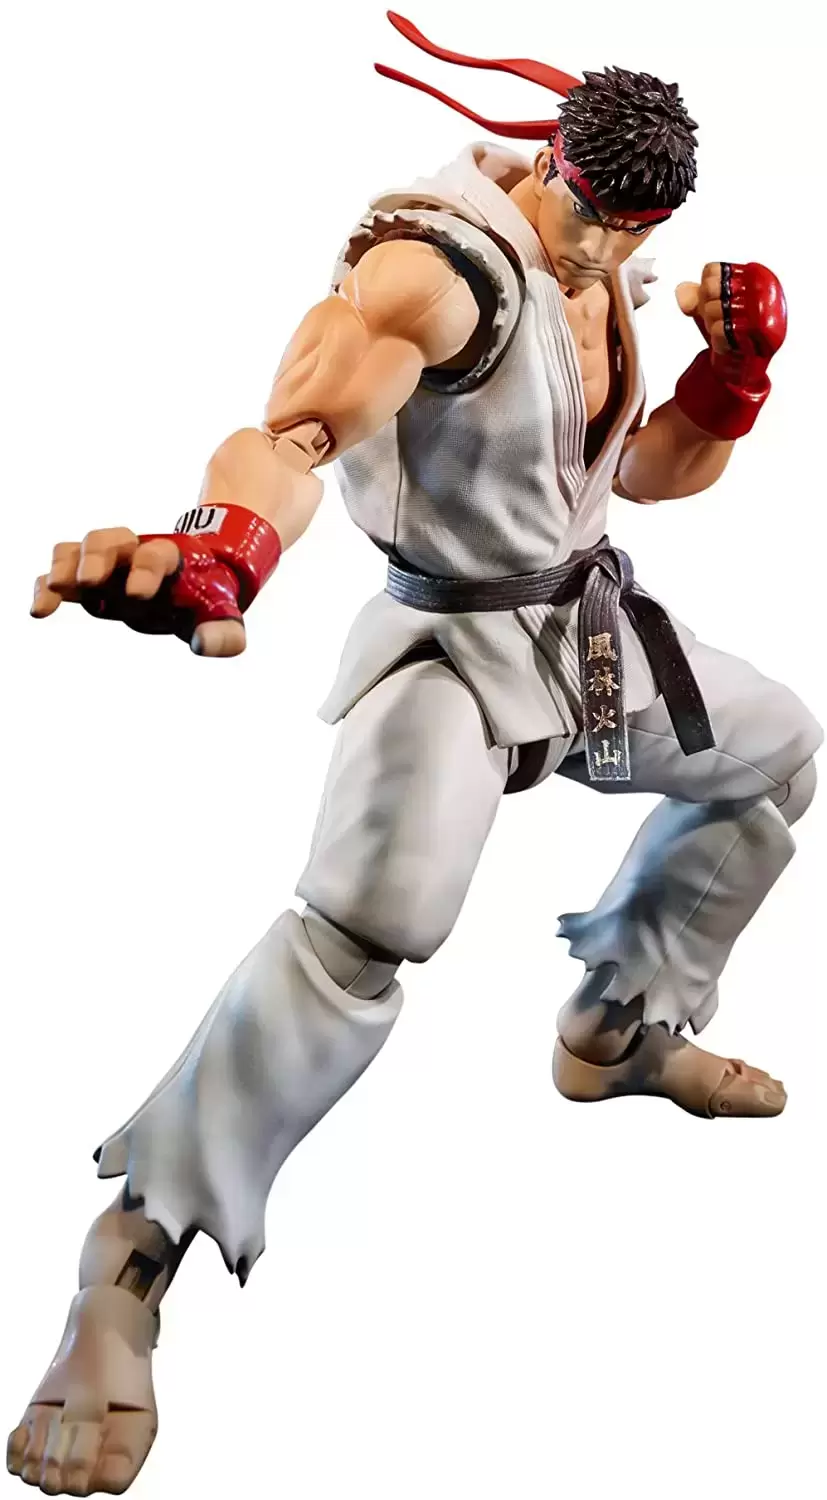 S.H. Figuarts Video Games - Street Fighter (No. 01) - Ryu